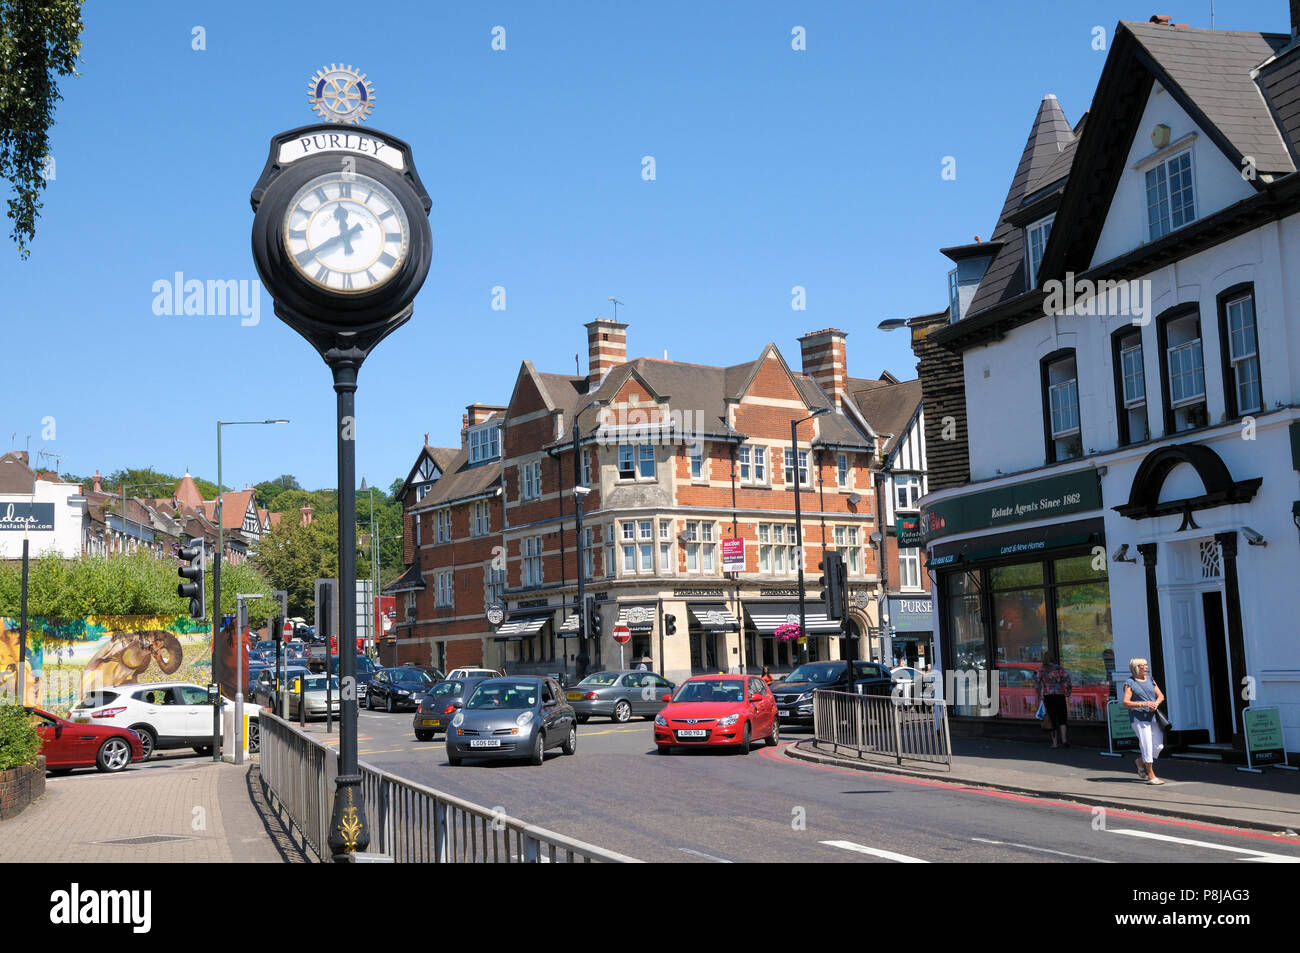 Purley Cross and town centre, Surrey, London Borough of Croydon, Greater London, UK Stock Photo